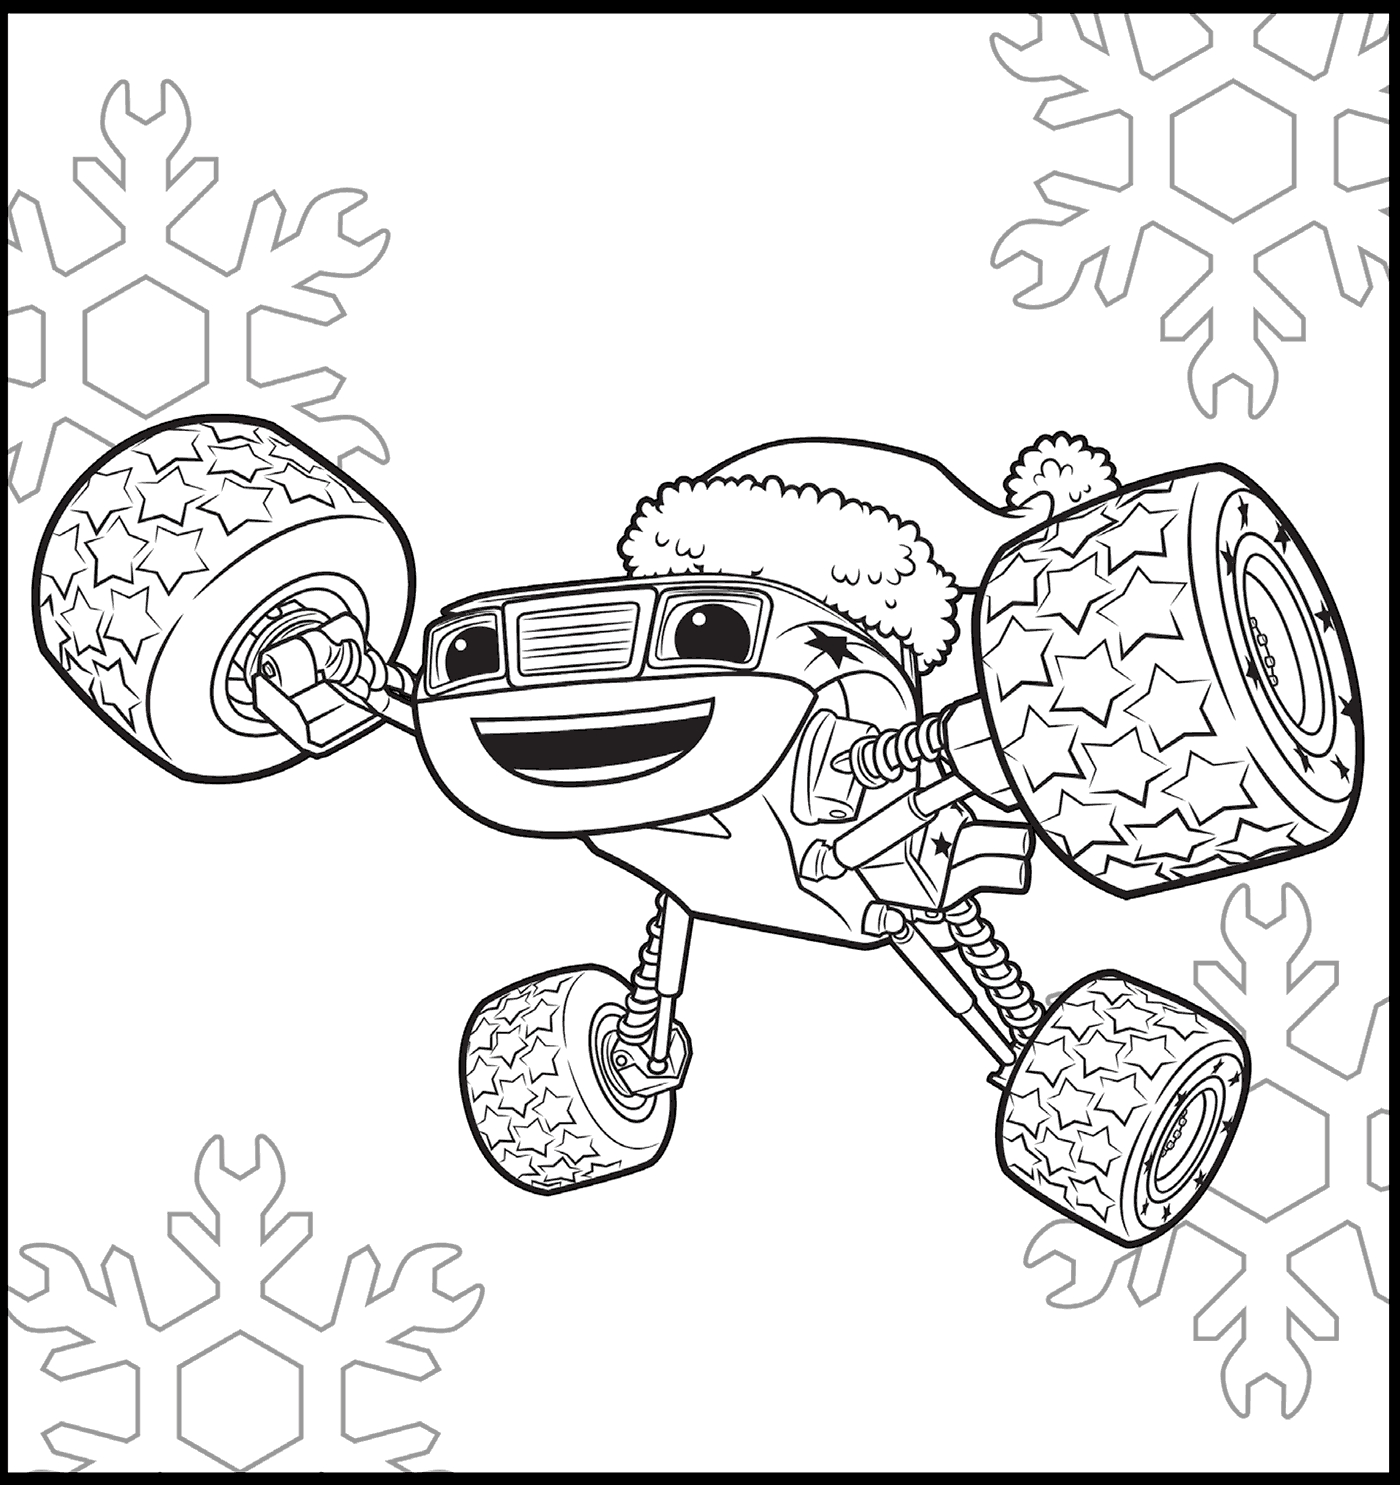 Blaze And The Monster Machines Coloring Pages To Print at GetColorings